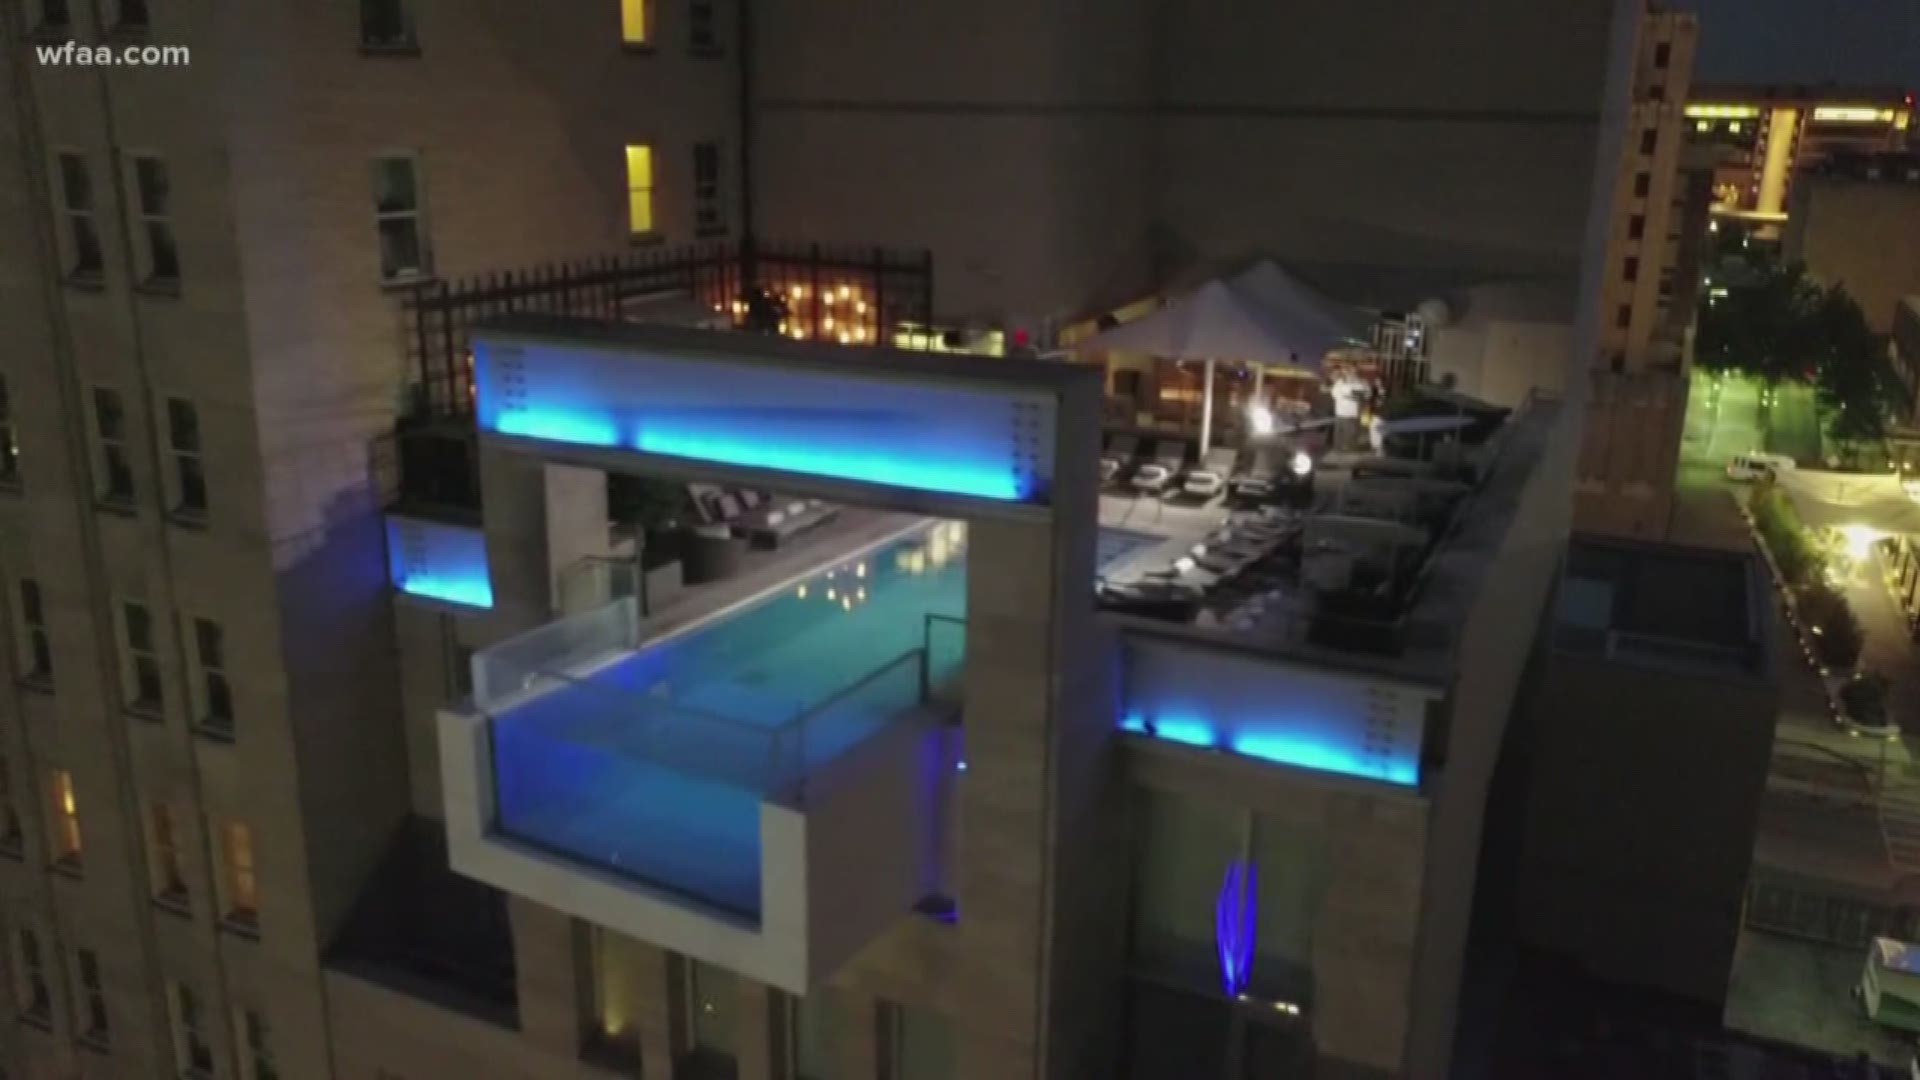 Cool pool: The Joule